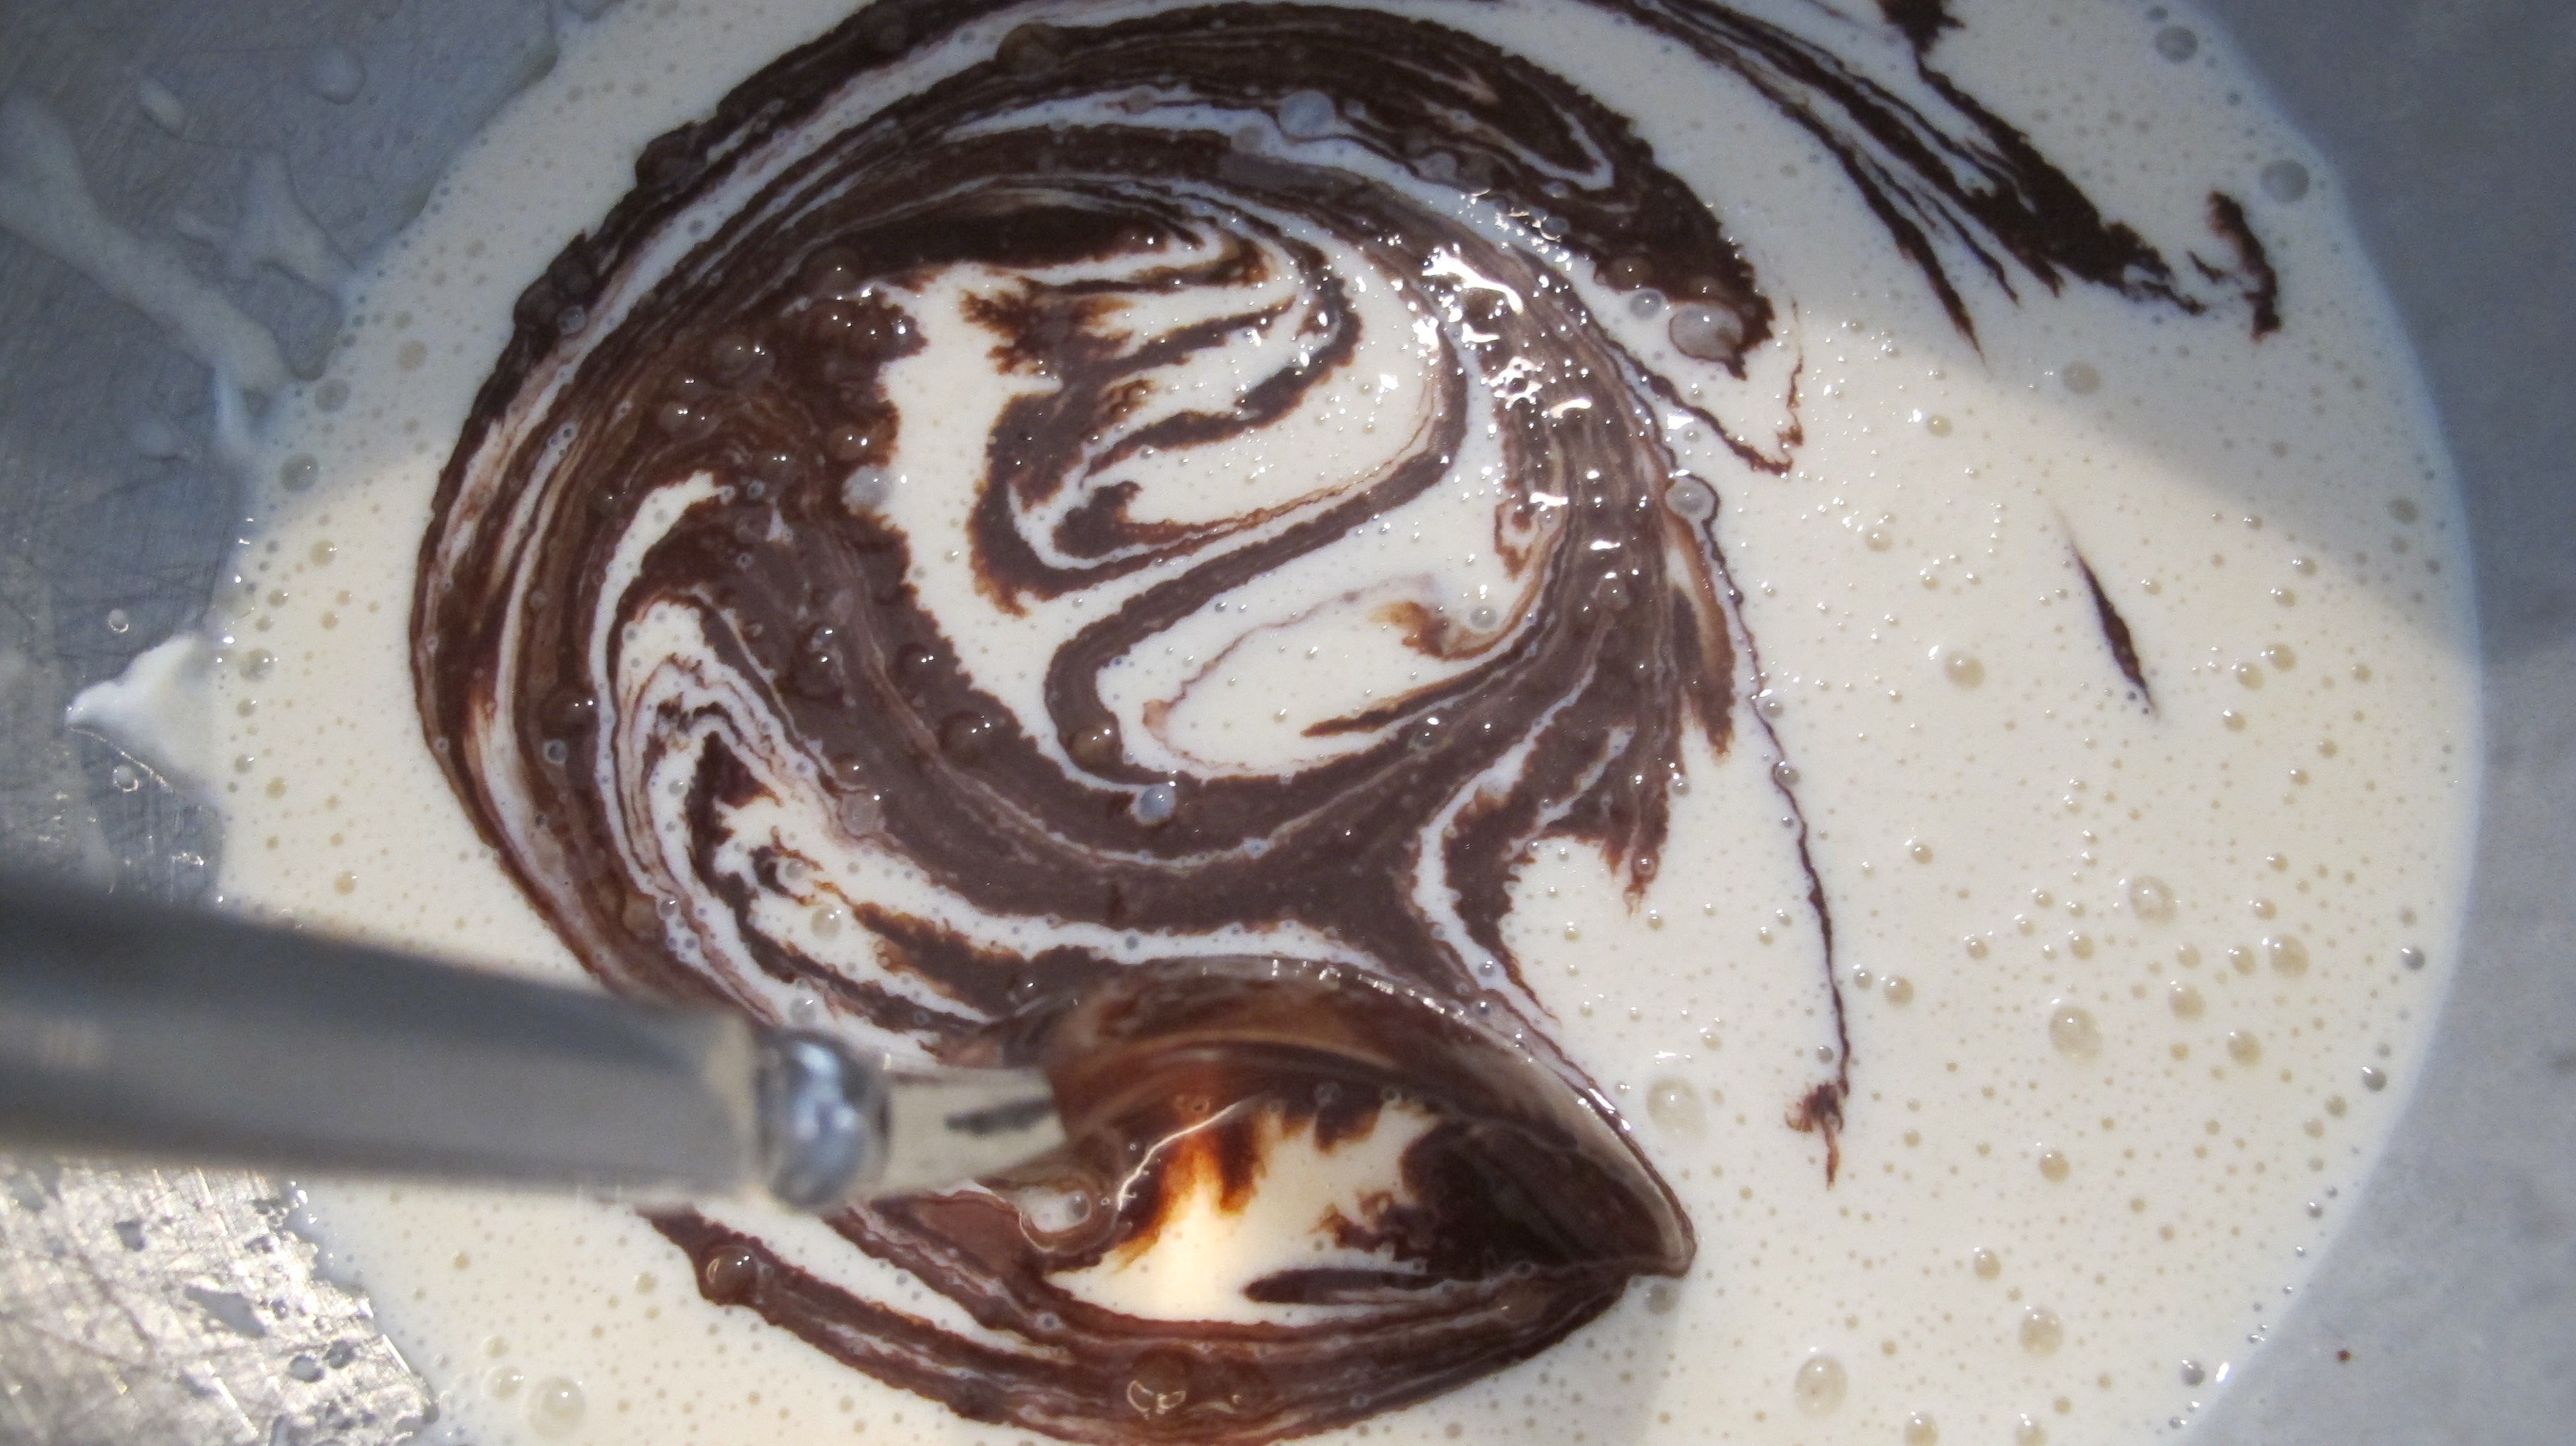 A beautiful swirl is created when mixing the cocoa into the milk-egg mixture. 